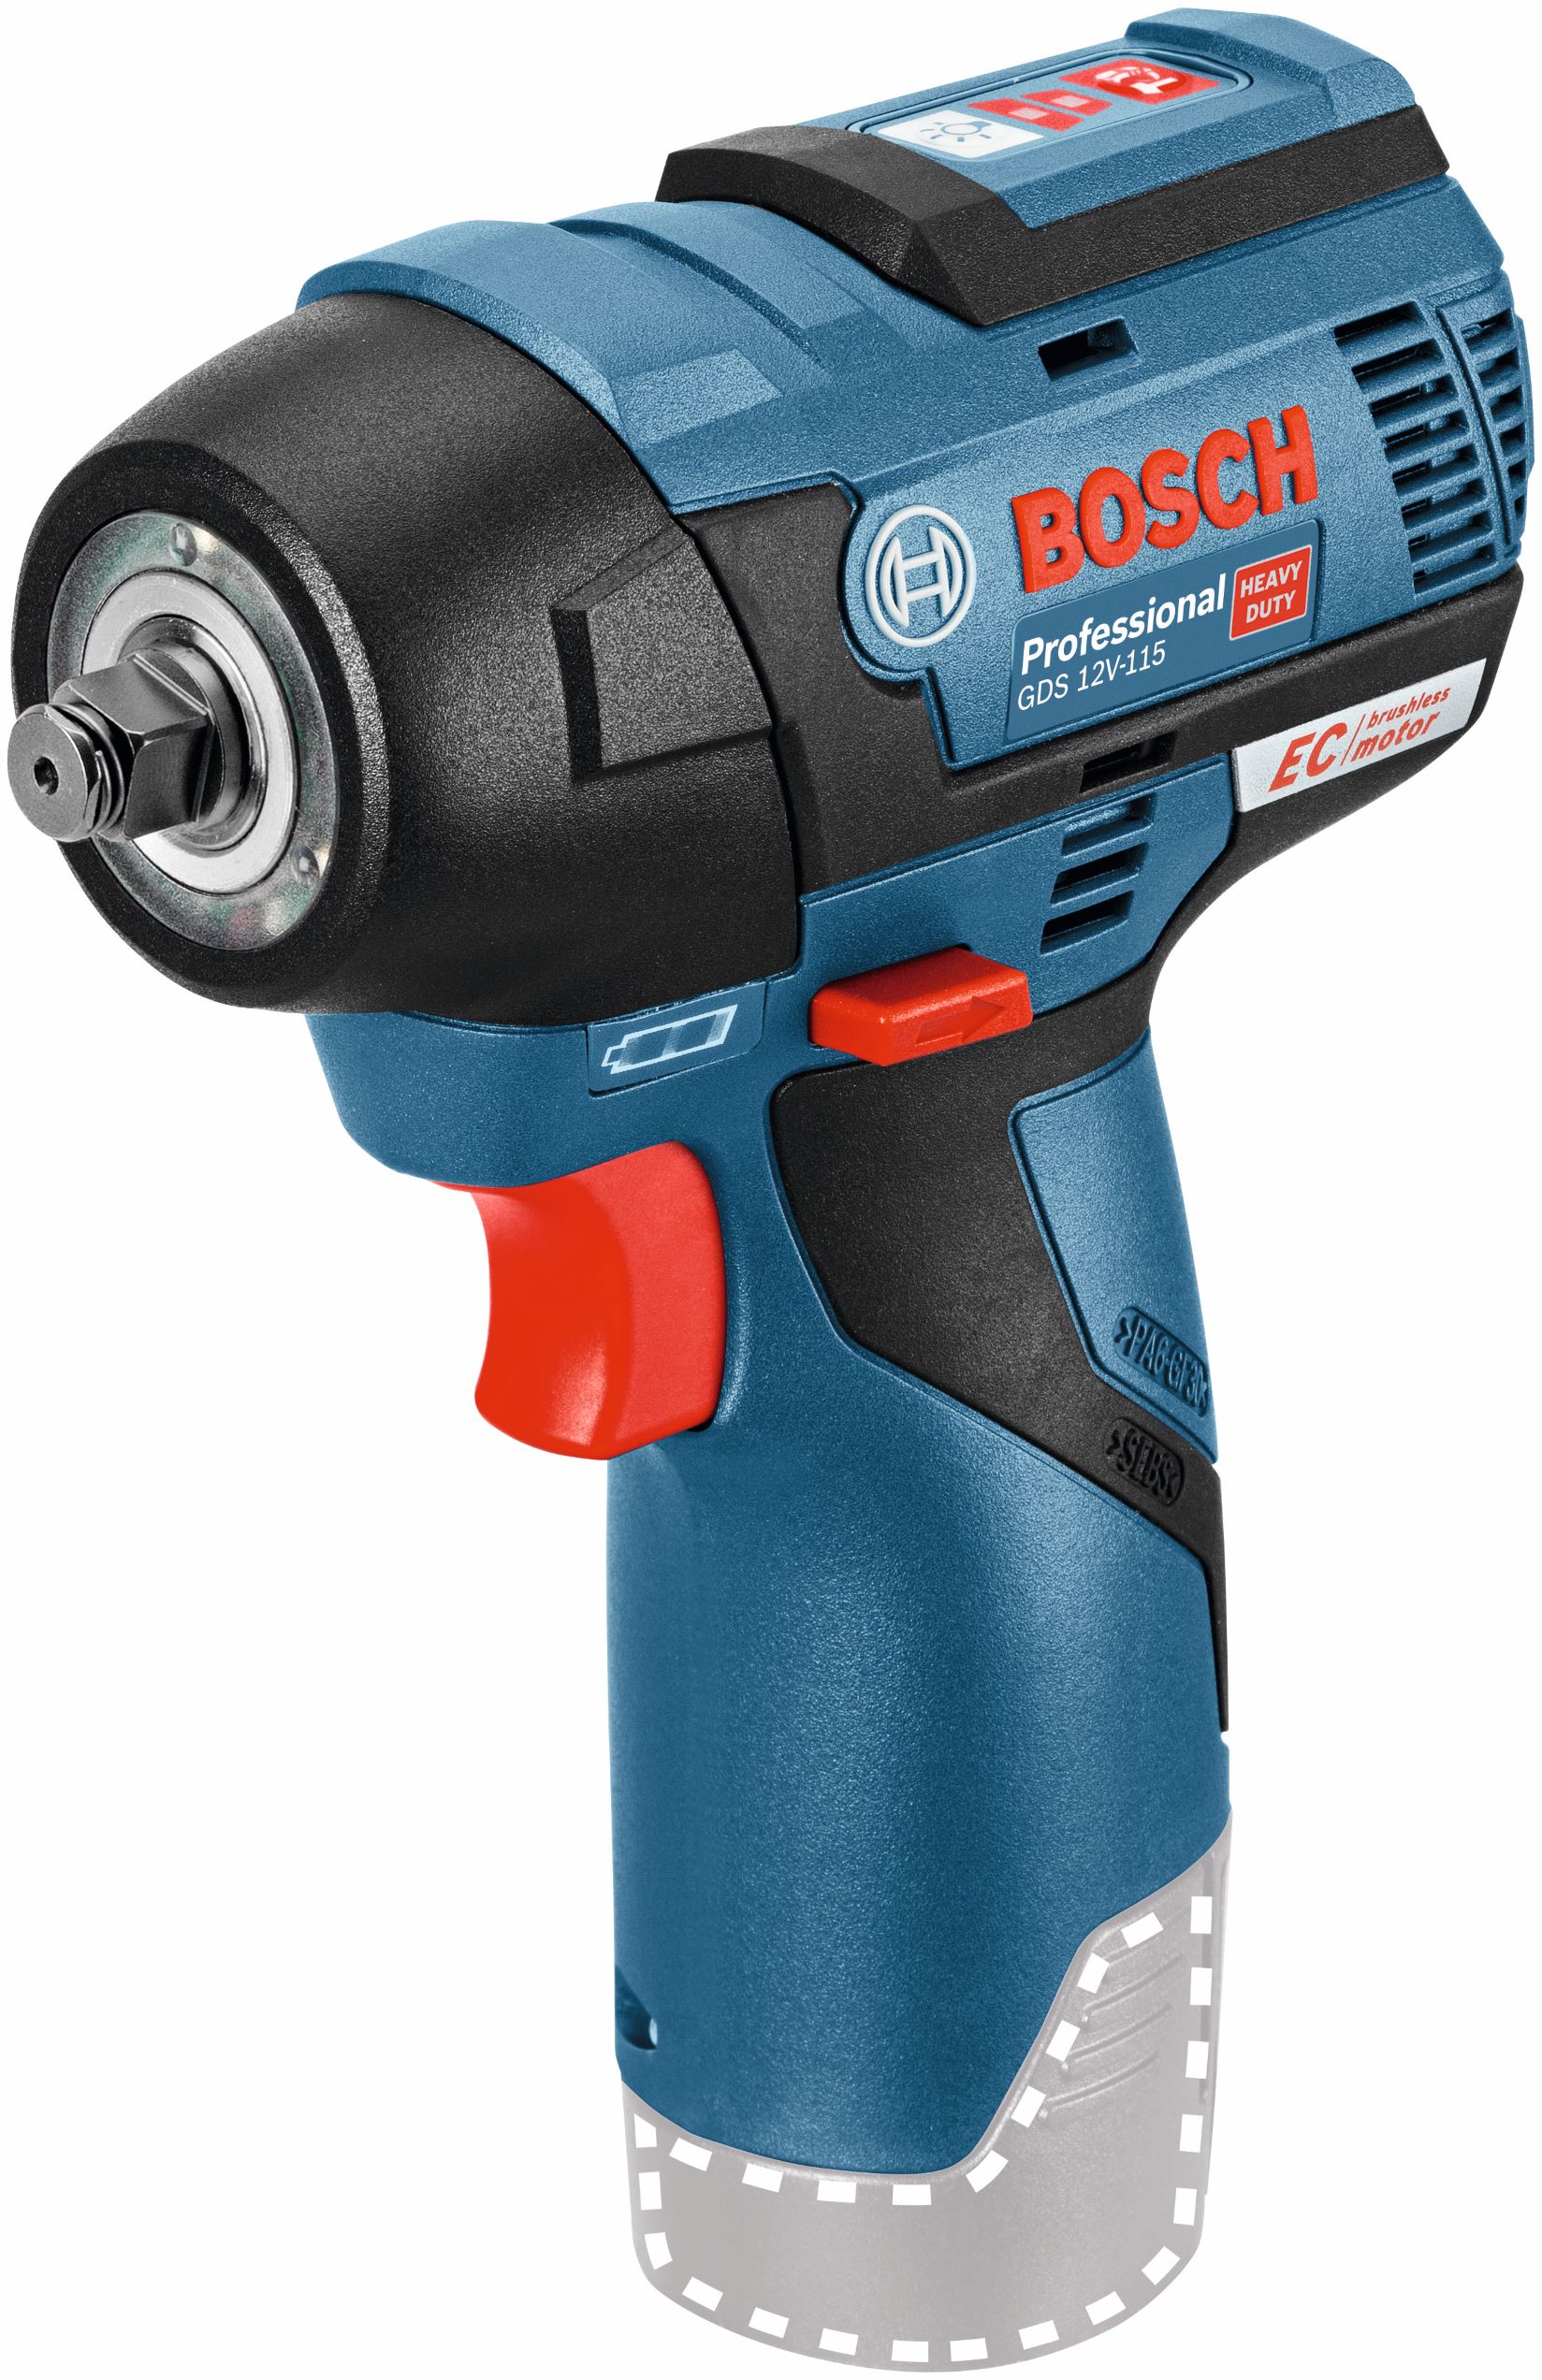 GDS 12V-115 EC Professional Cordless Impact Wrench in L-Boxx Bosch - 1